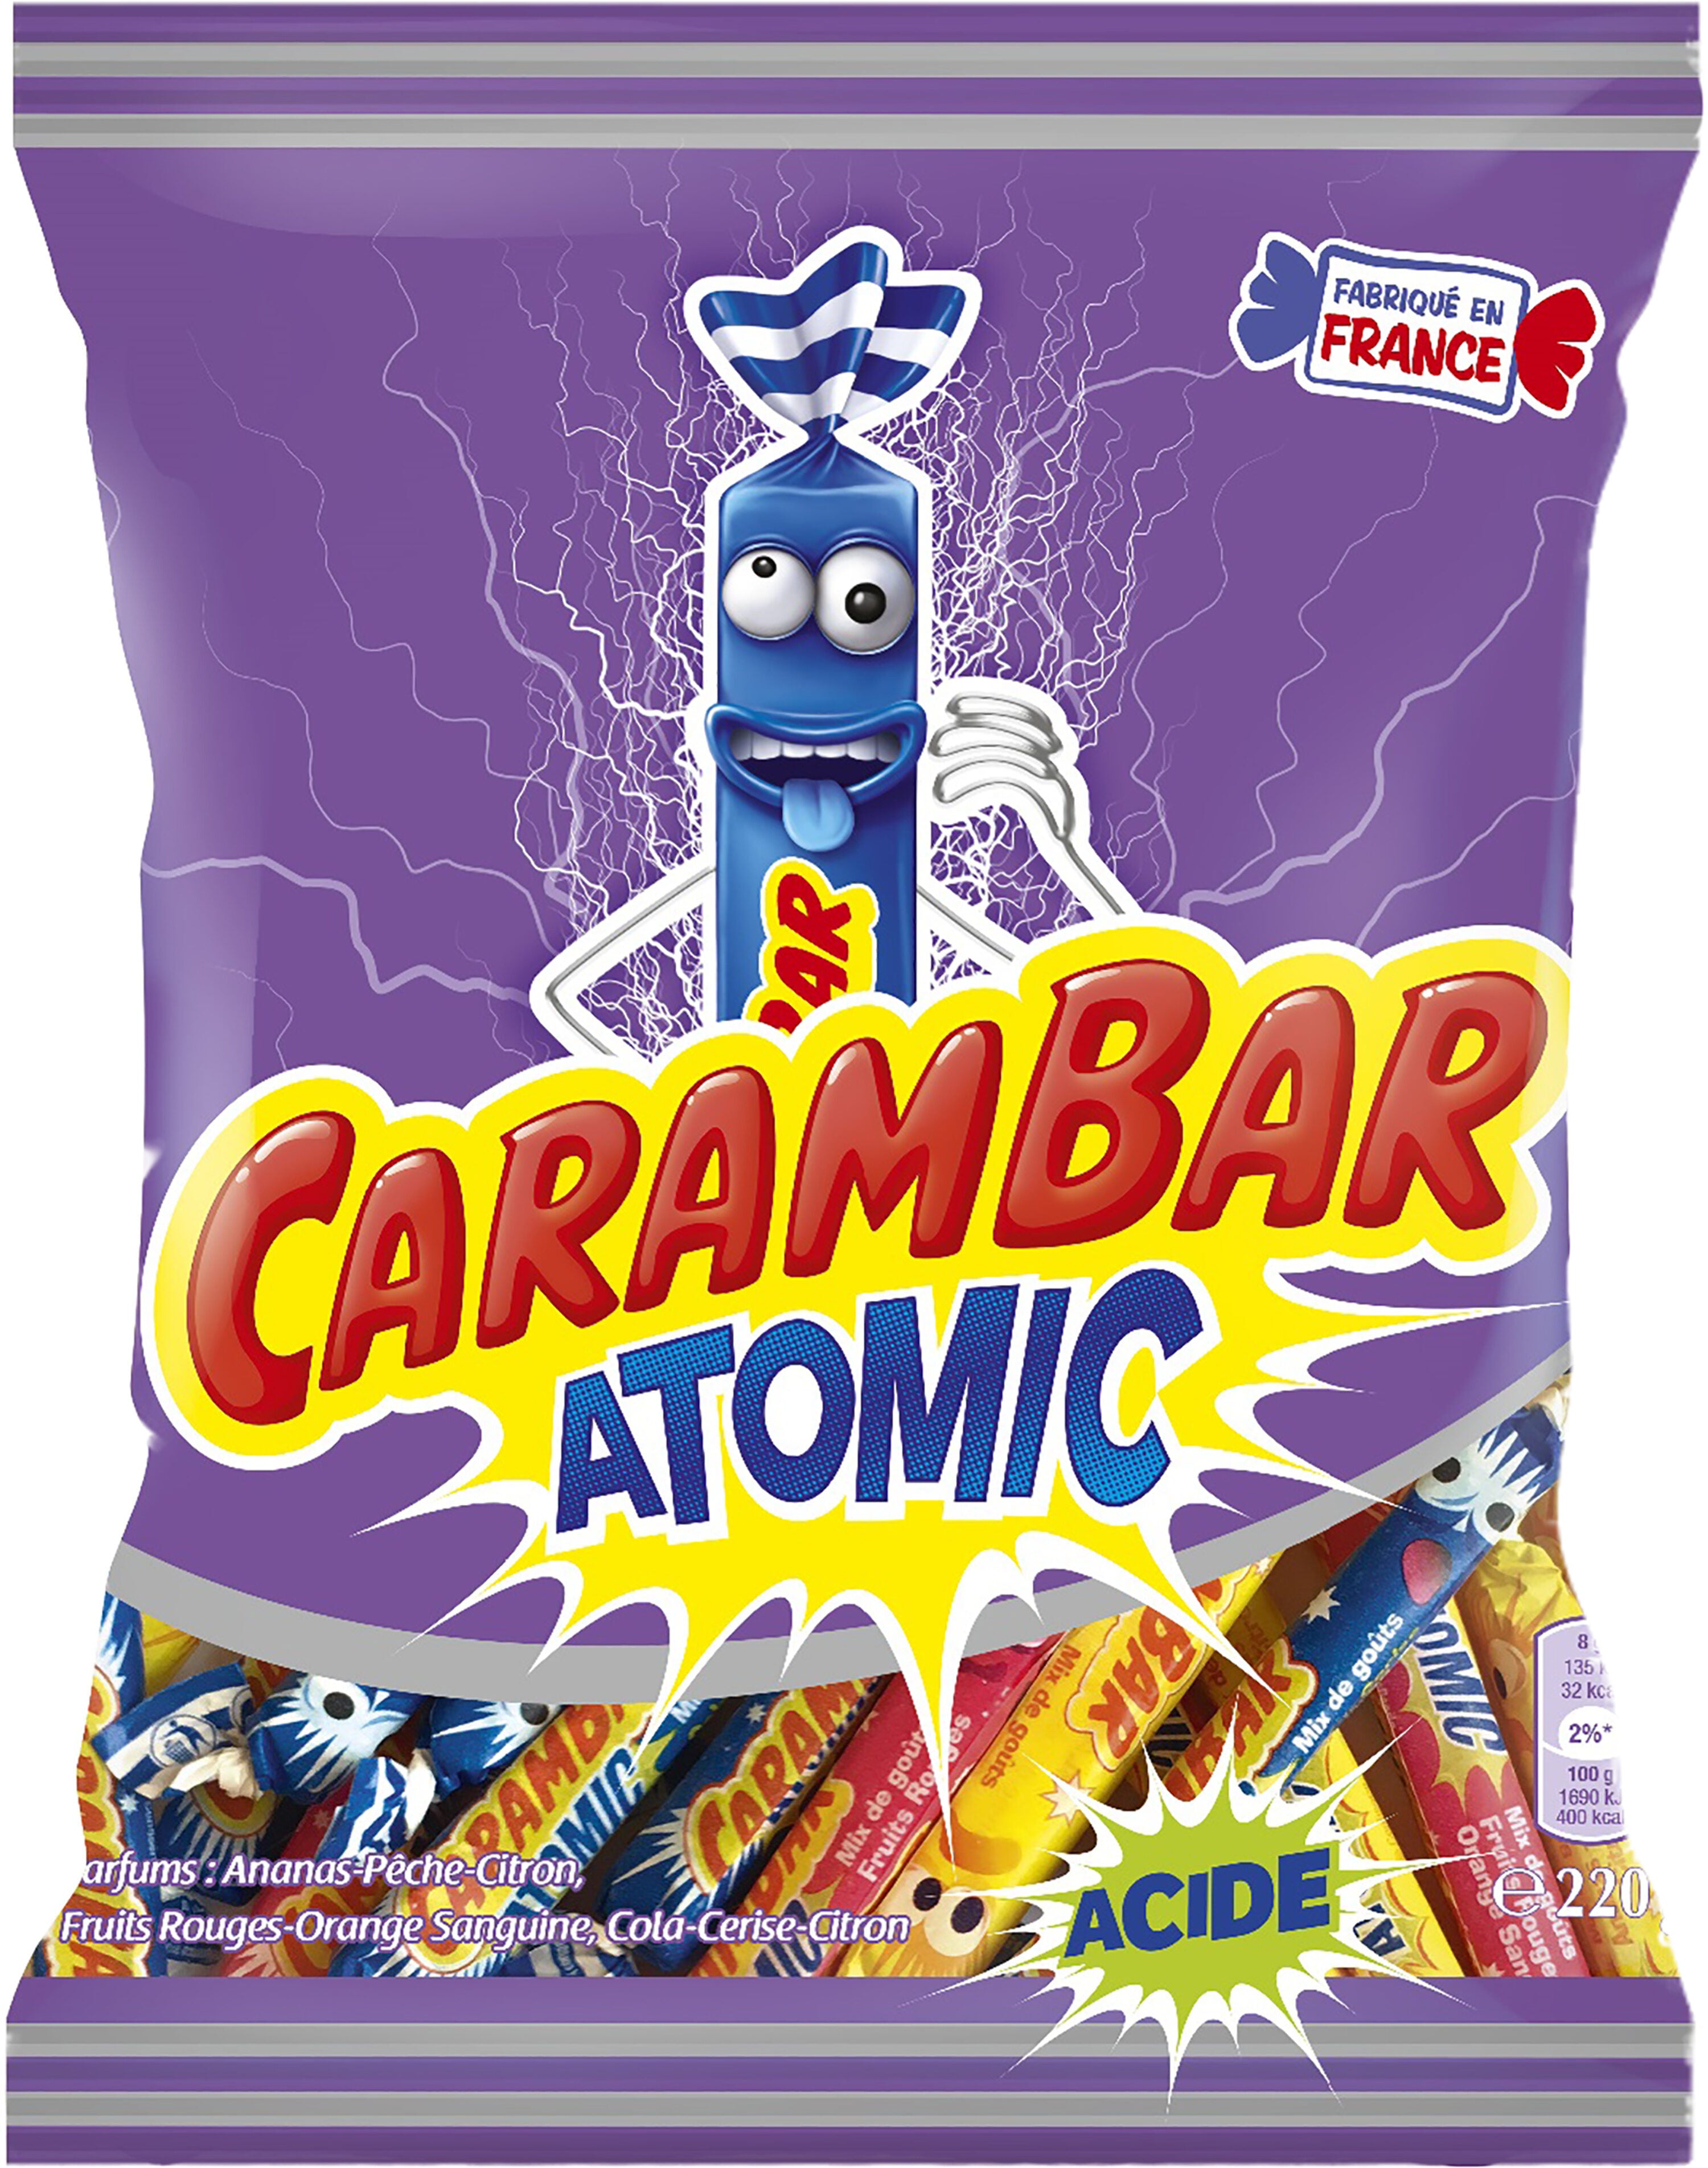 NEW 1 X Carambar Atomic Sweets - 220g French Chewy India